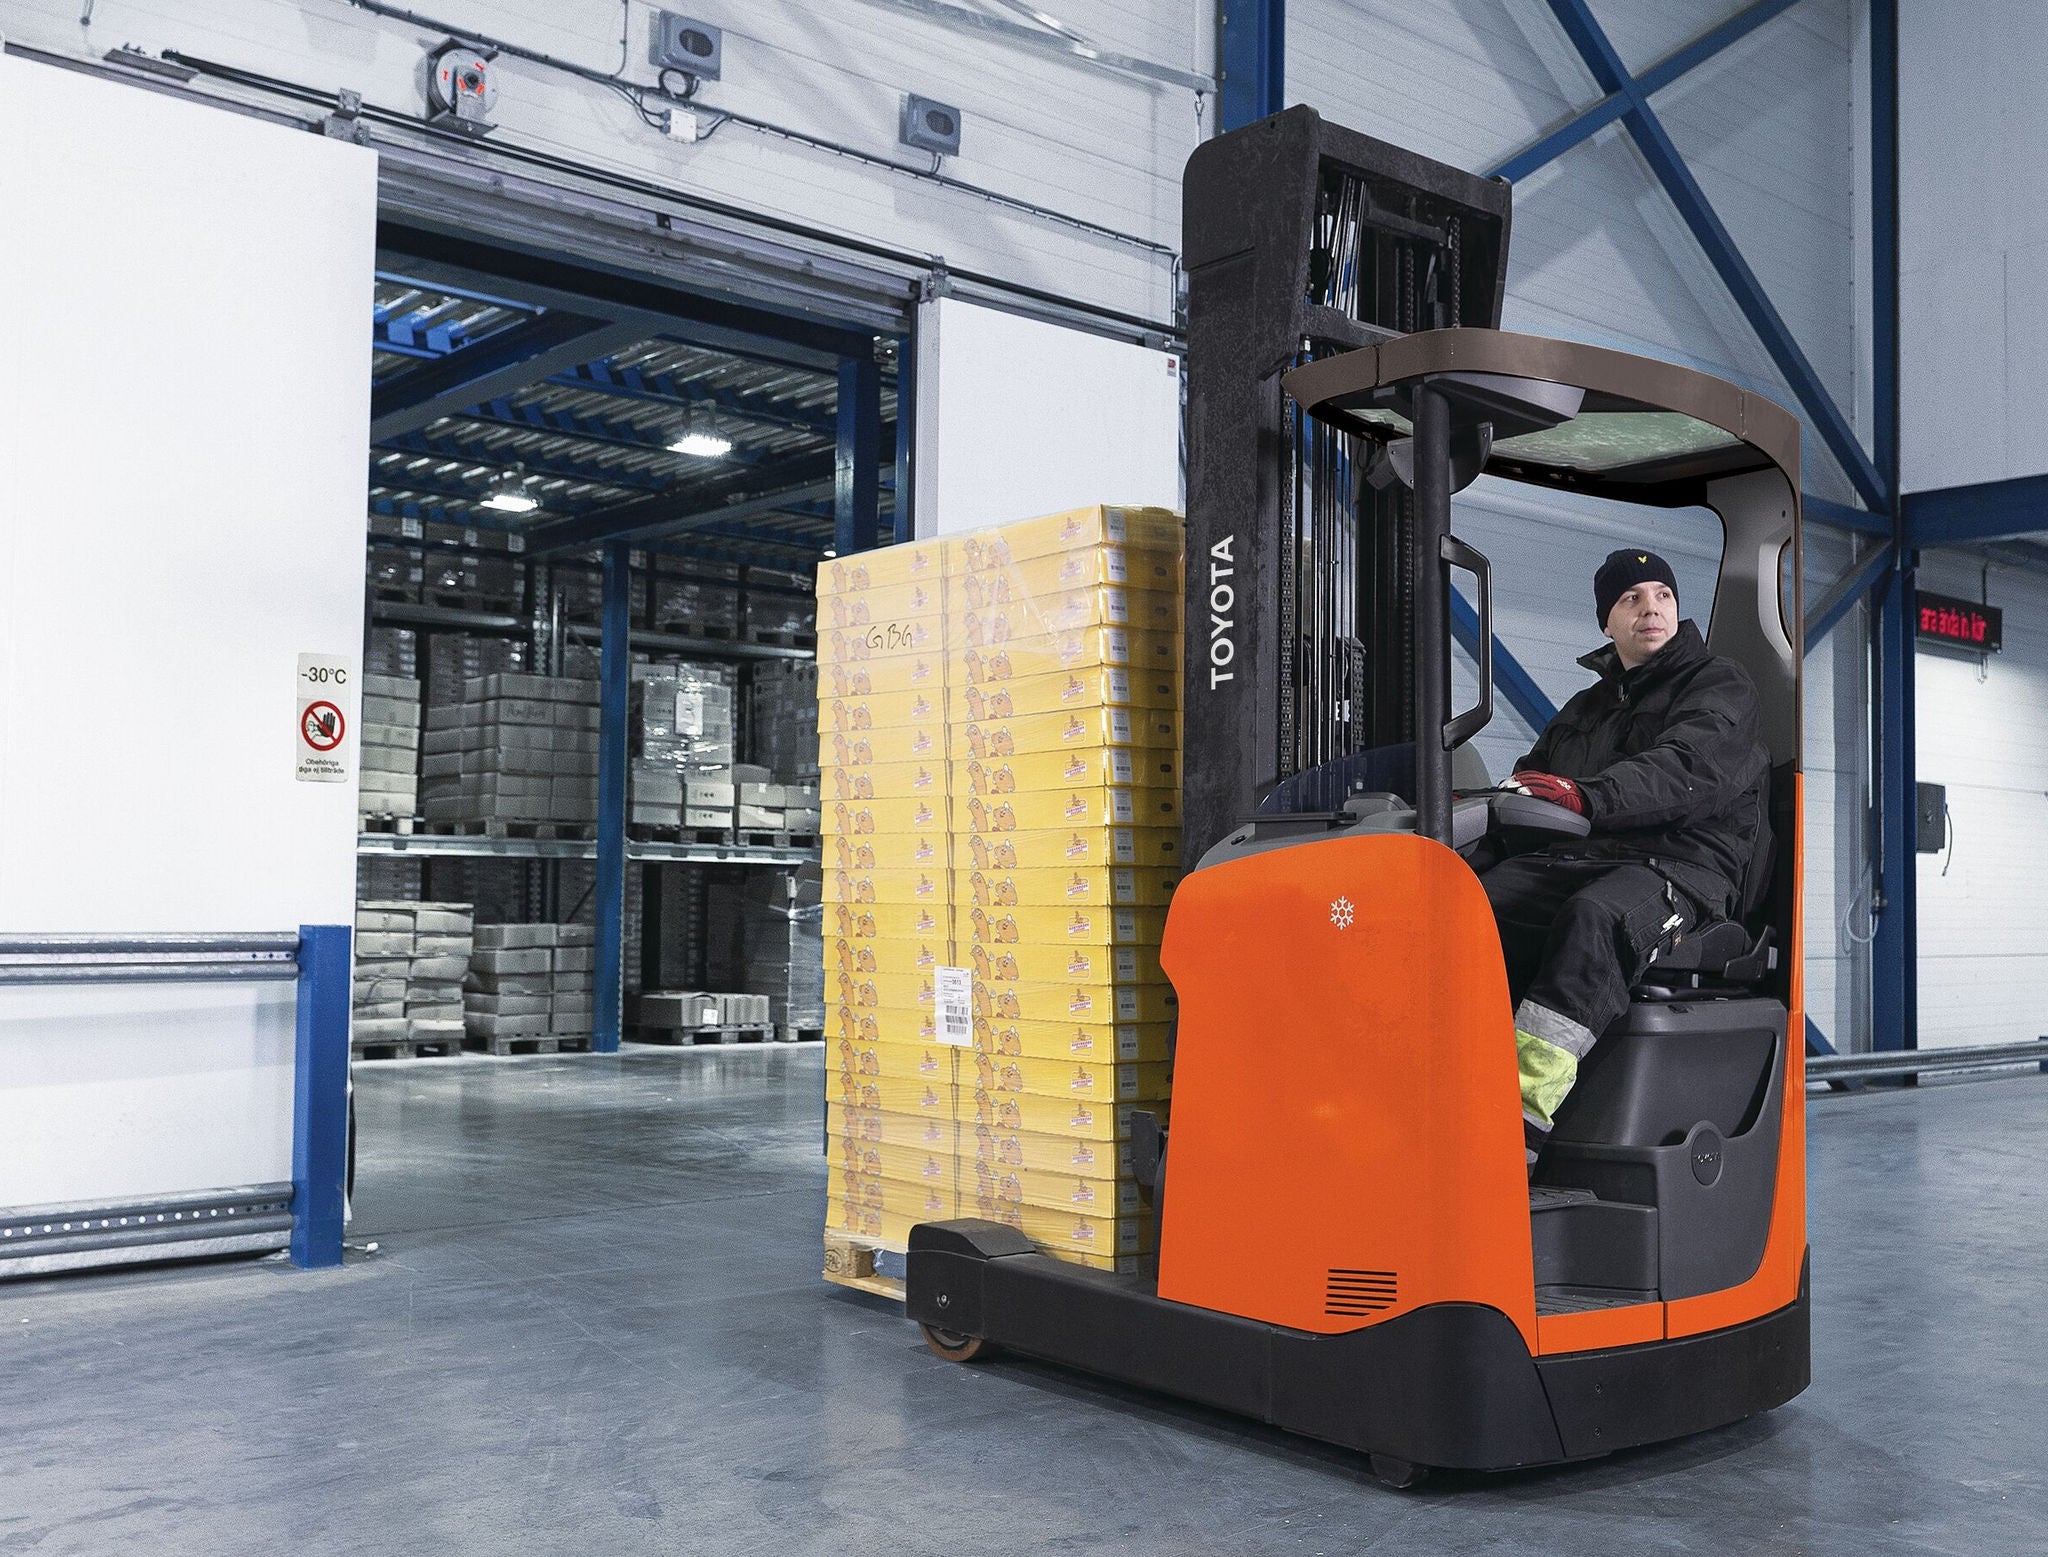 Man wearing heavy coat and hat while using orange forklift in cold storage environment